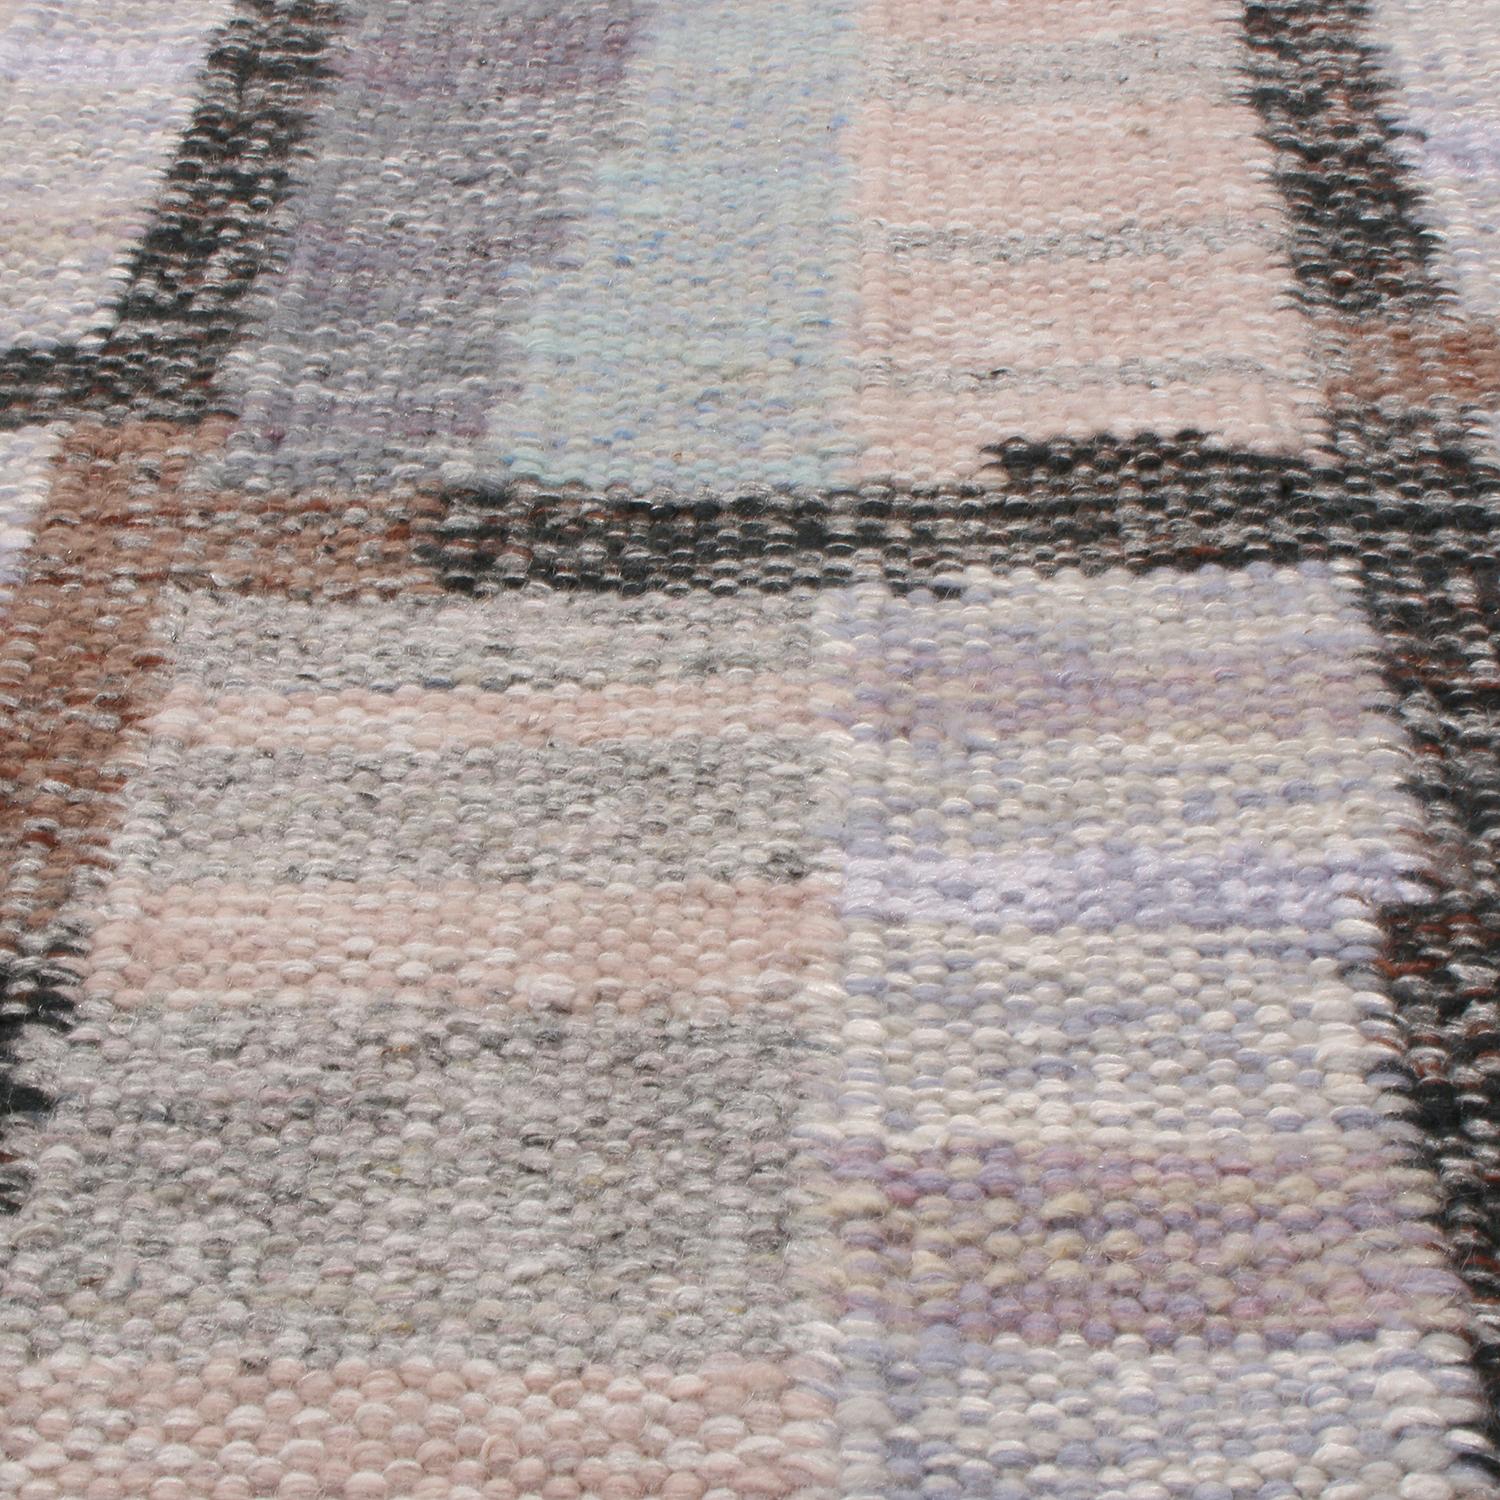 Rug & Kilim’s Scandinavian-Inspired Blue-Gray and Beige Natural Wool Kilim Rug In New Condition For Sale In Long Island City, NY